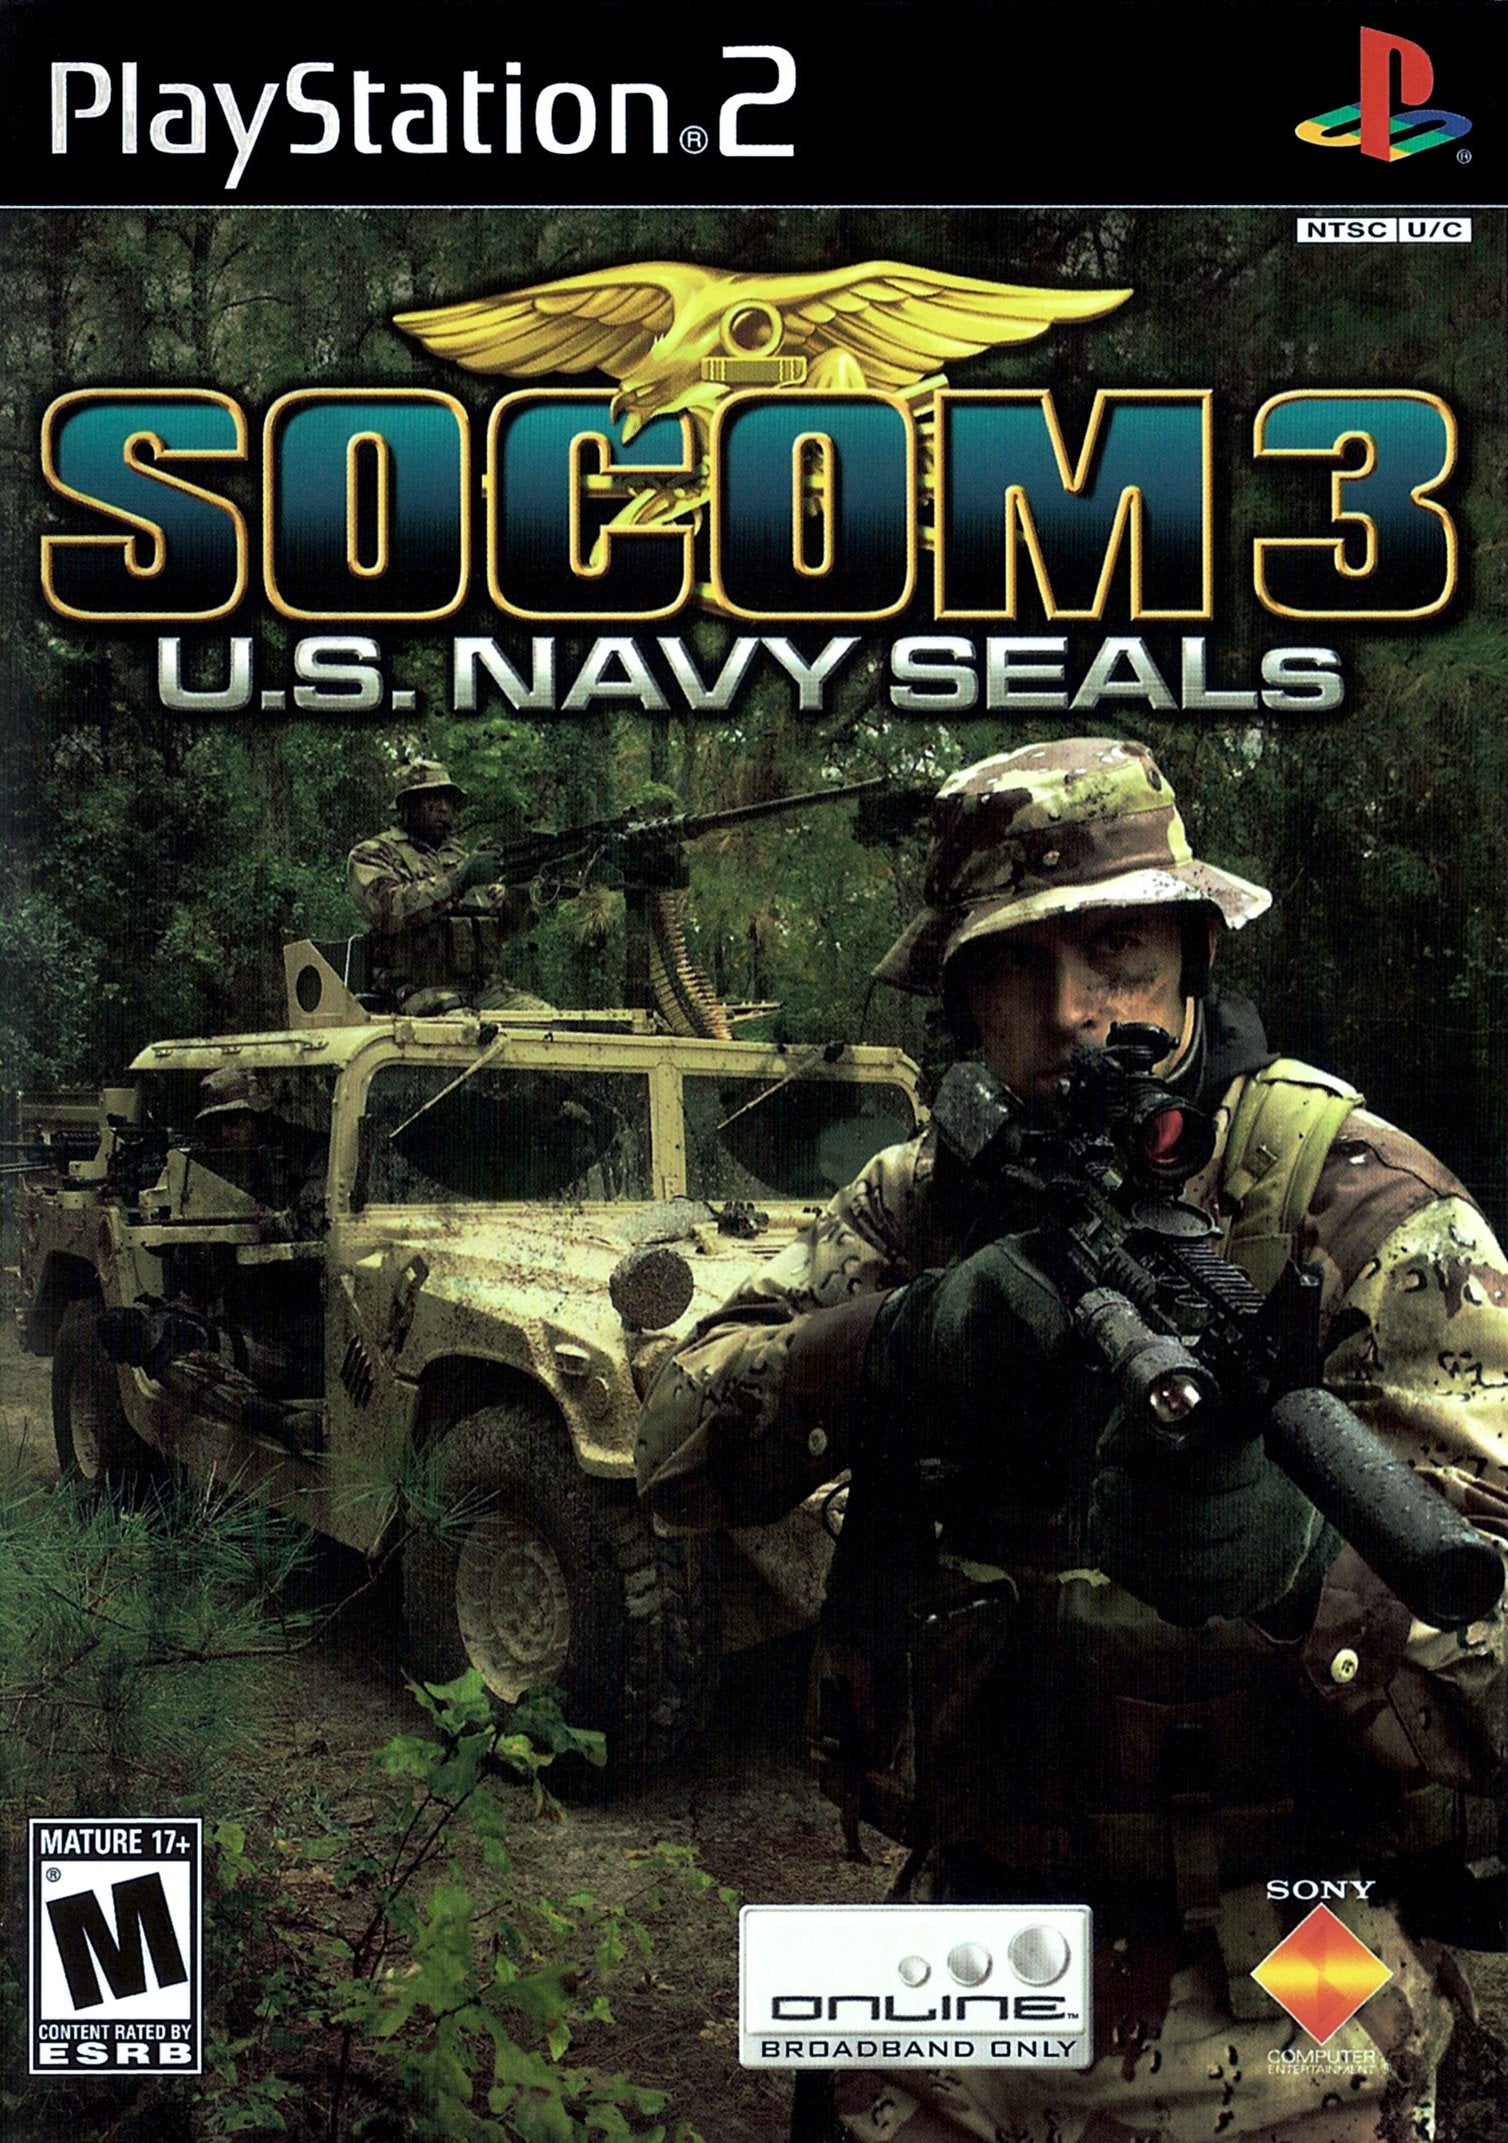 SOCOM 3: U.S. Navy SEALs - PlayStation 2 (PS2) Game - YourGamingShop.com - Buy, Sell, Trade Video Games Online. 120 Day Warranty. Satisfaction Guaranteed.